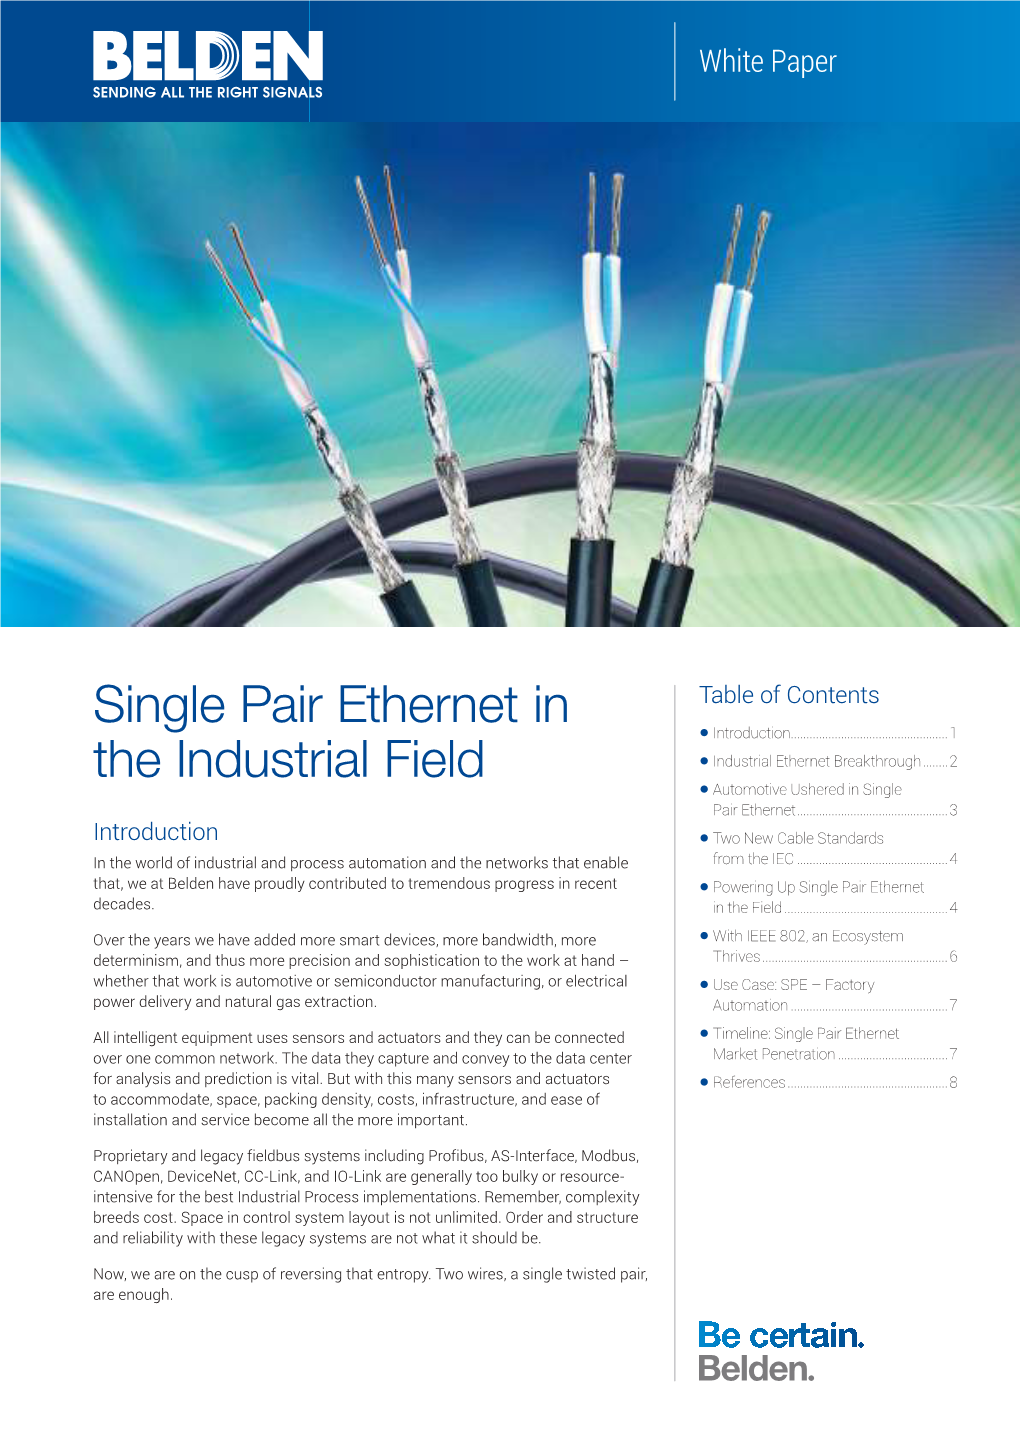 Single Pair Ethernet in the Industrial Field